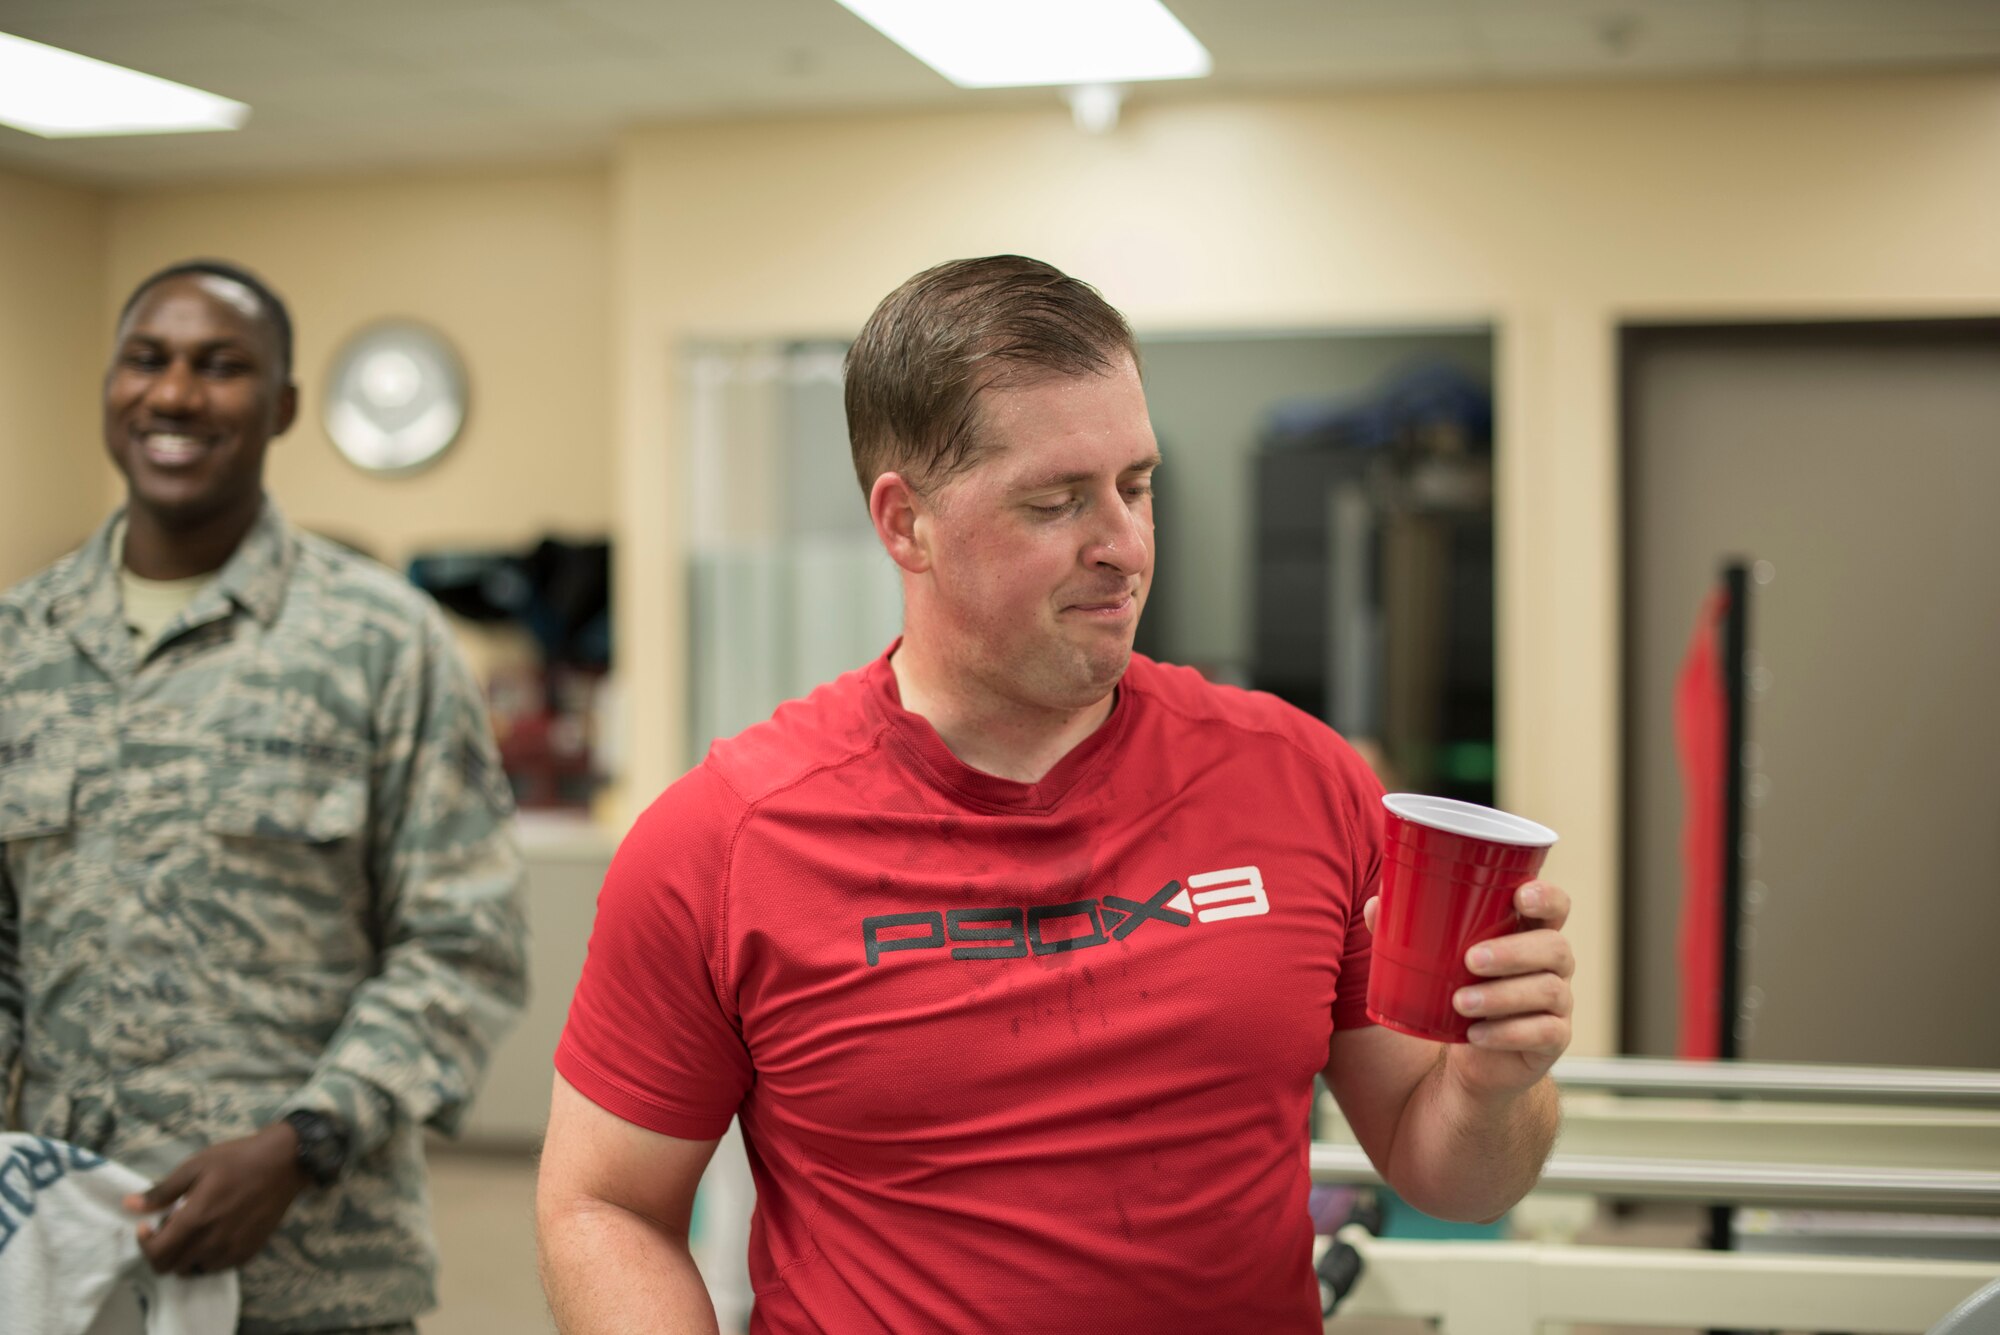 Tech. Sgt. James Hodgman, 60th Air Mobility Wing Public Affairs NCO in charge of command information, hydrates during a training session at the physical therapy clinic inside David Grant USAF Medical Center at Travis Air Force Base, Calif., Nov. 27, 2017. The physical therapy clinic is comprised of dedicated professionals who specialize in providing care for musculoskeletal disorders and movement dysfunction. (U.S. Air Force photo by Airman 1st Class Jonathon D. A. Carnell)